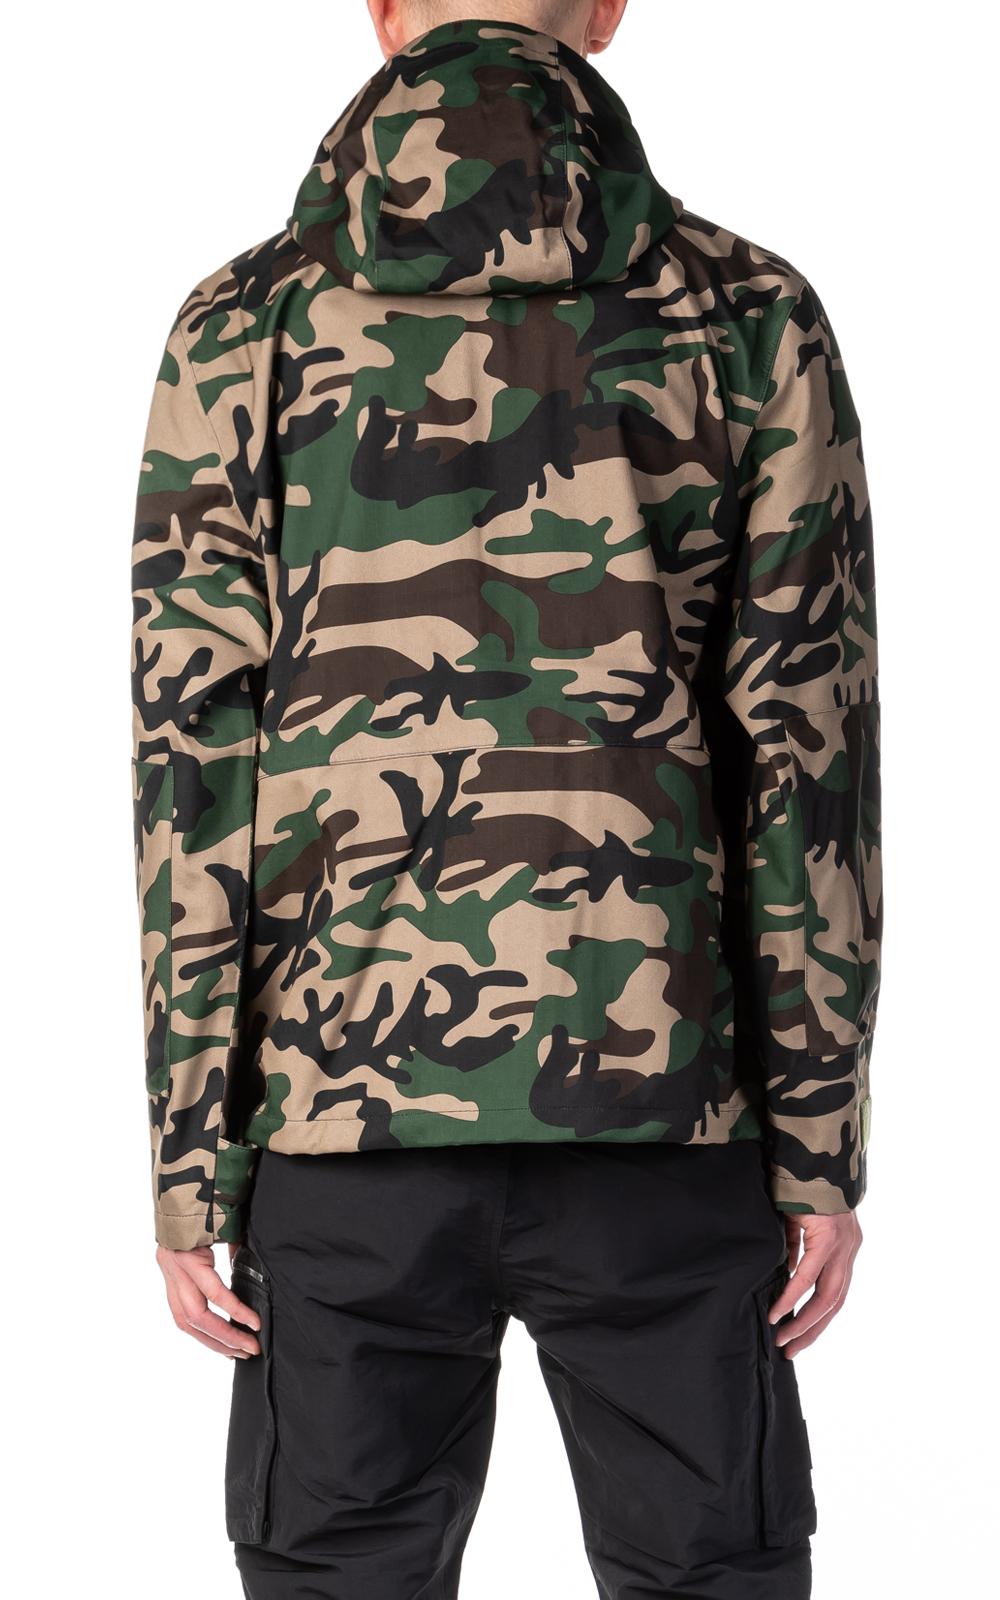 Stussy Synthetic Shell Hooded Jacket Camo for Men - Lyst